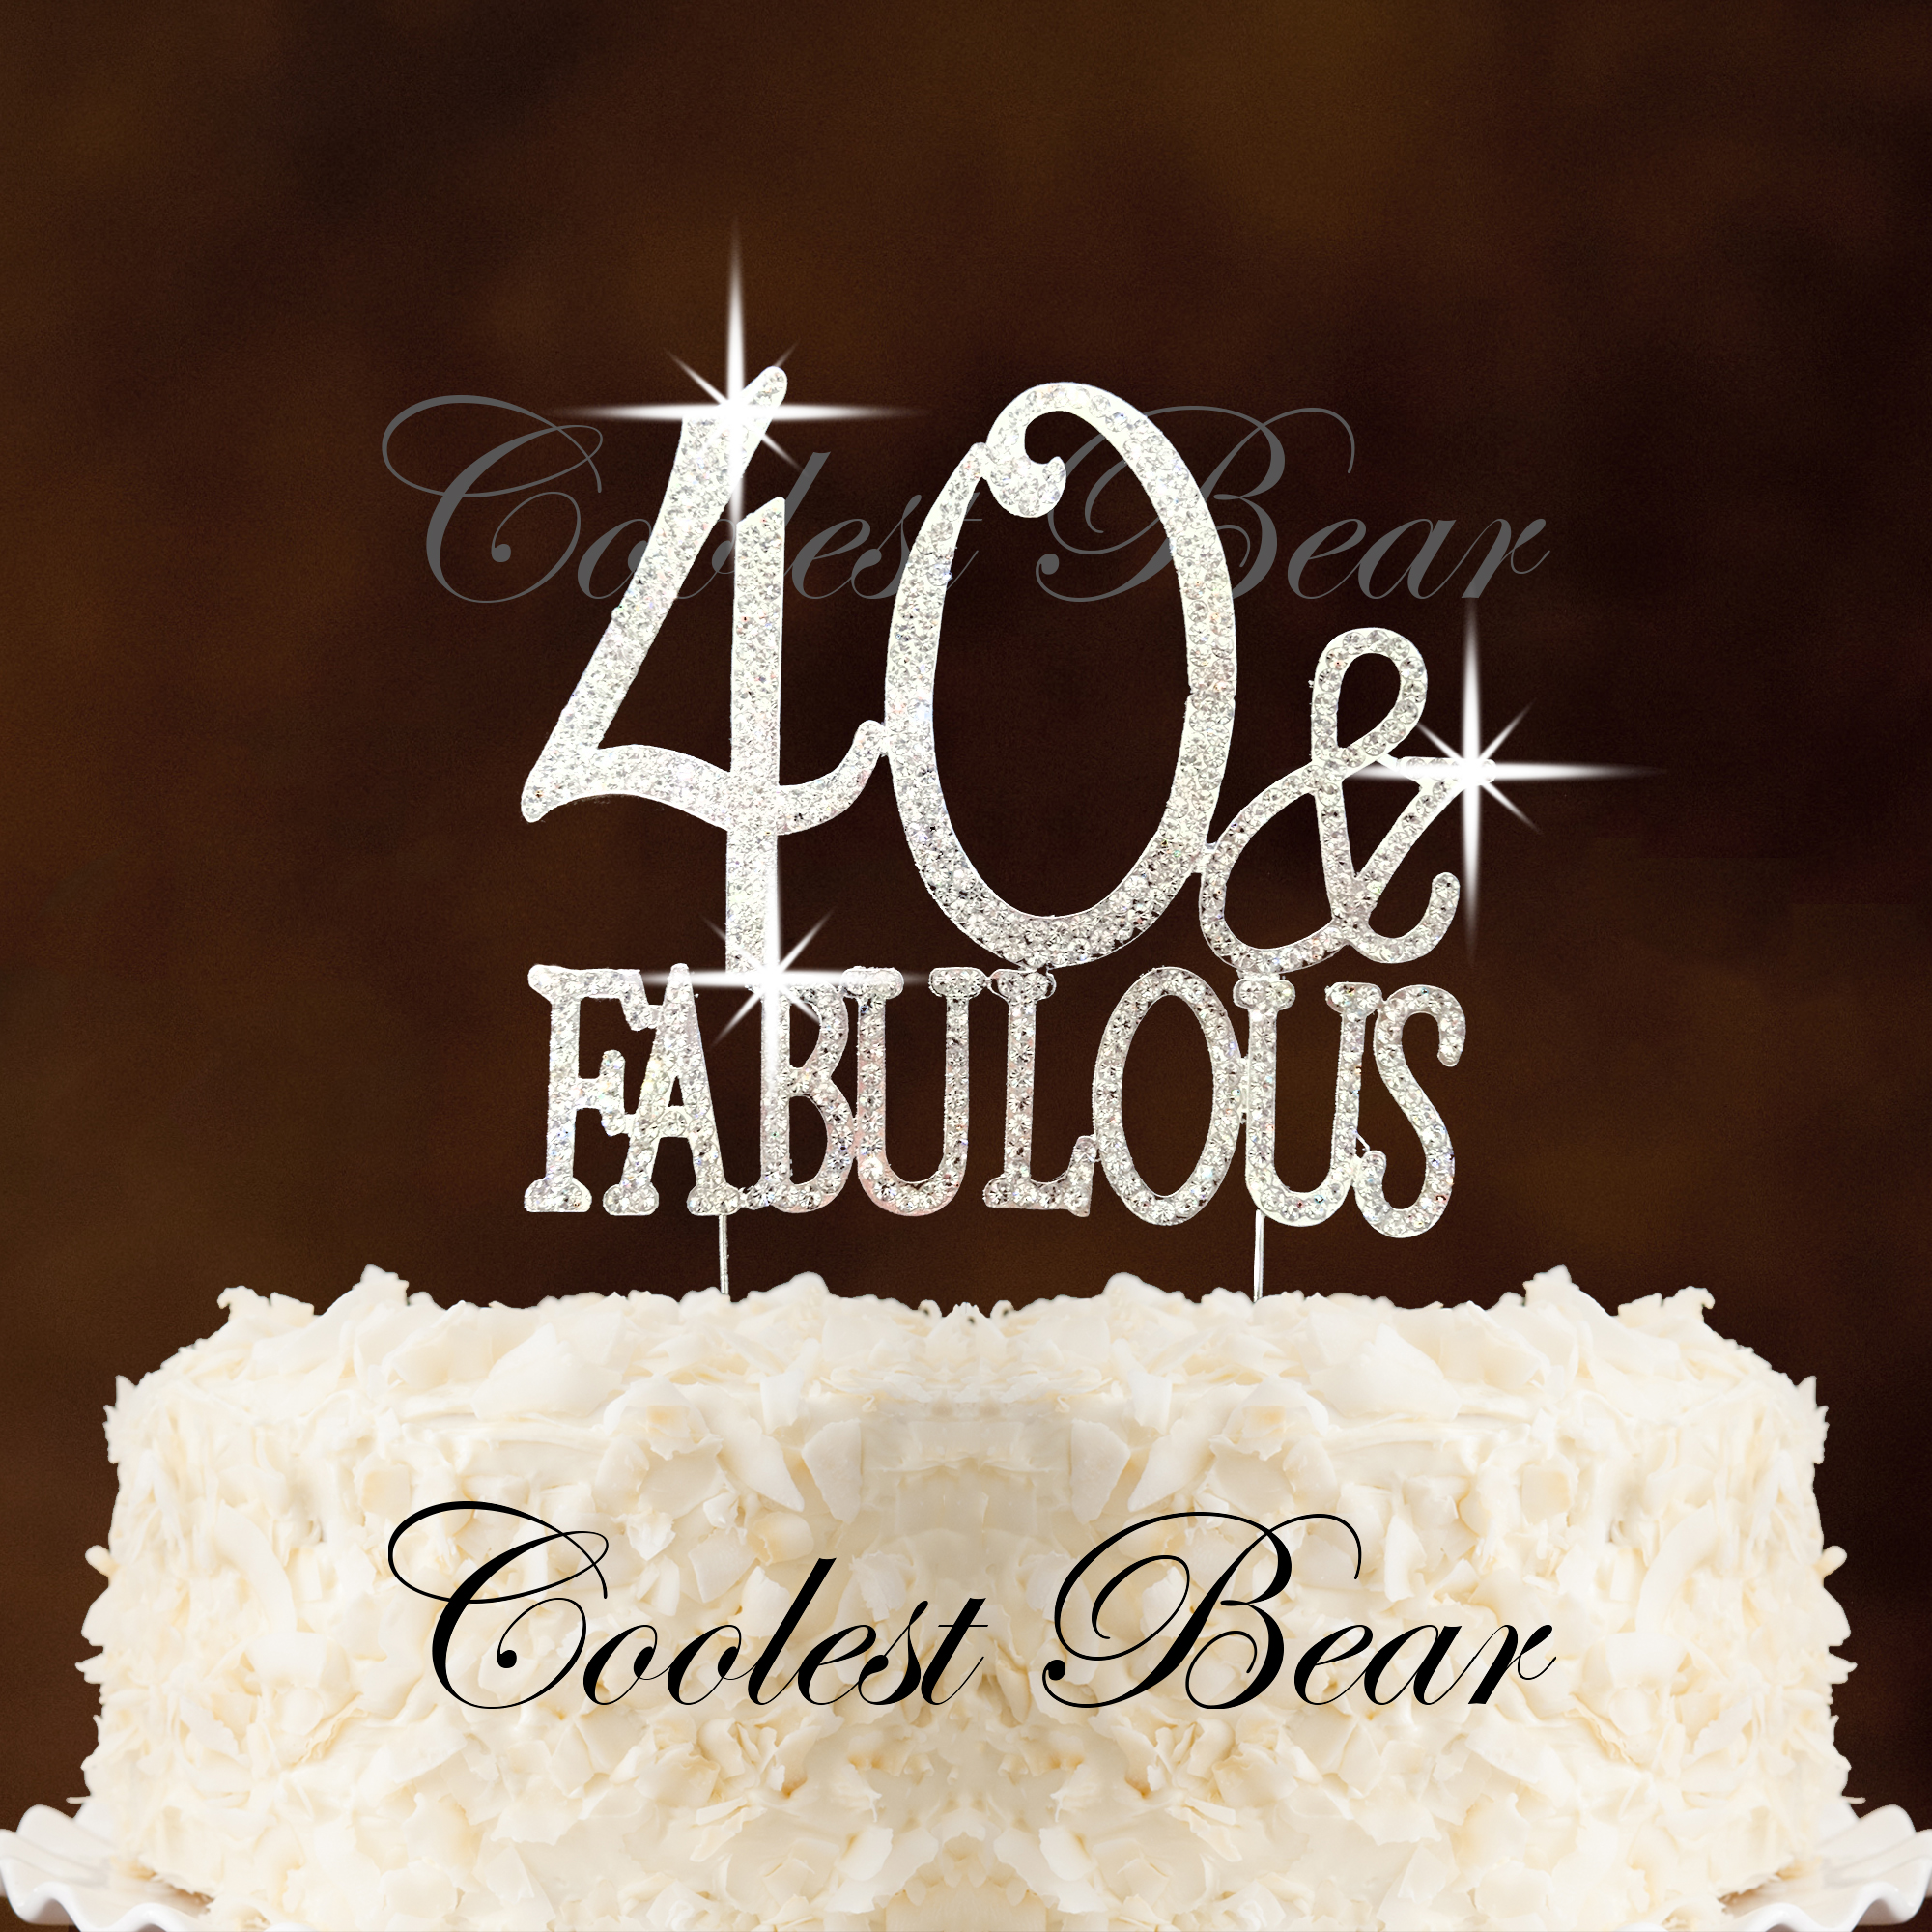 "40 & Fabulous", Silver - Coolest Bear Rhinestone Crystal Cake Topper - image 1 of 3